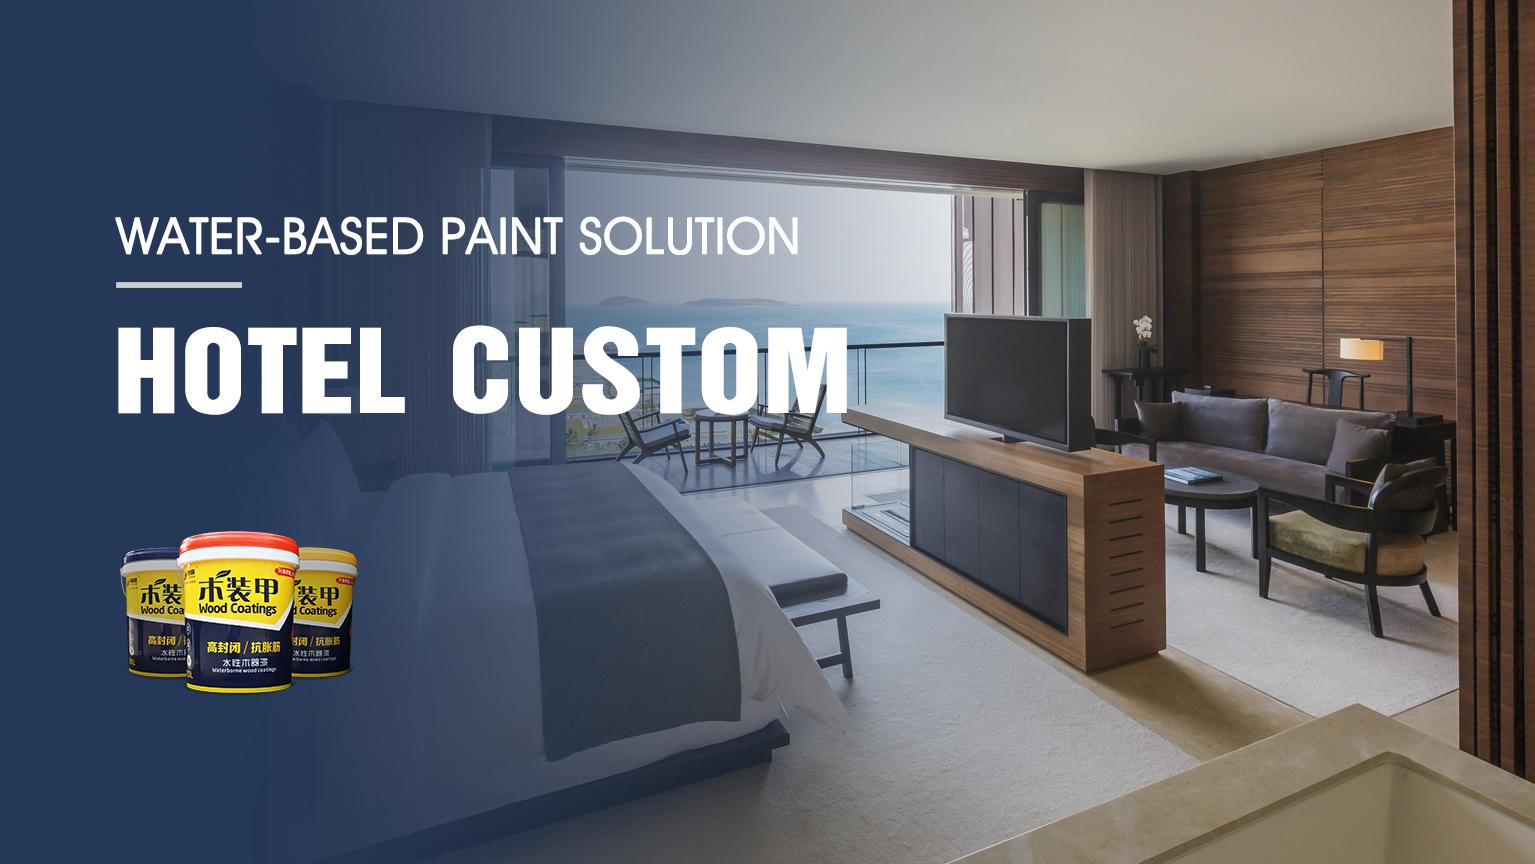 Hotel custom water-based paint solutions